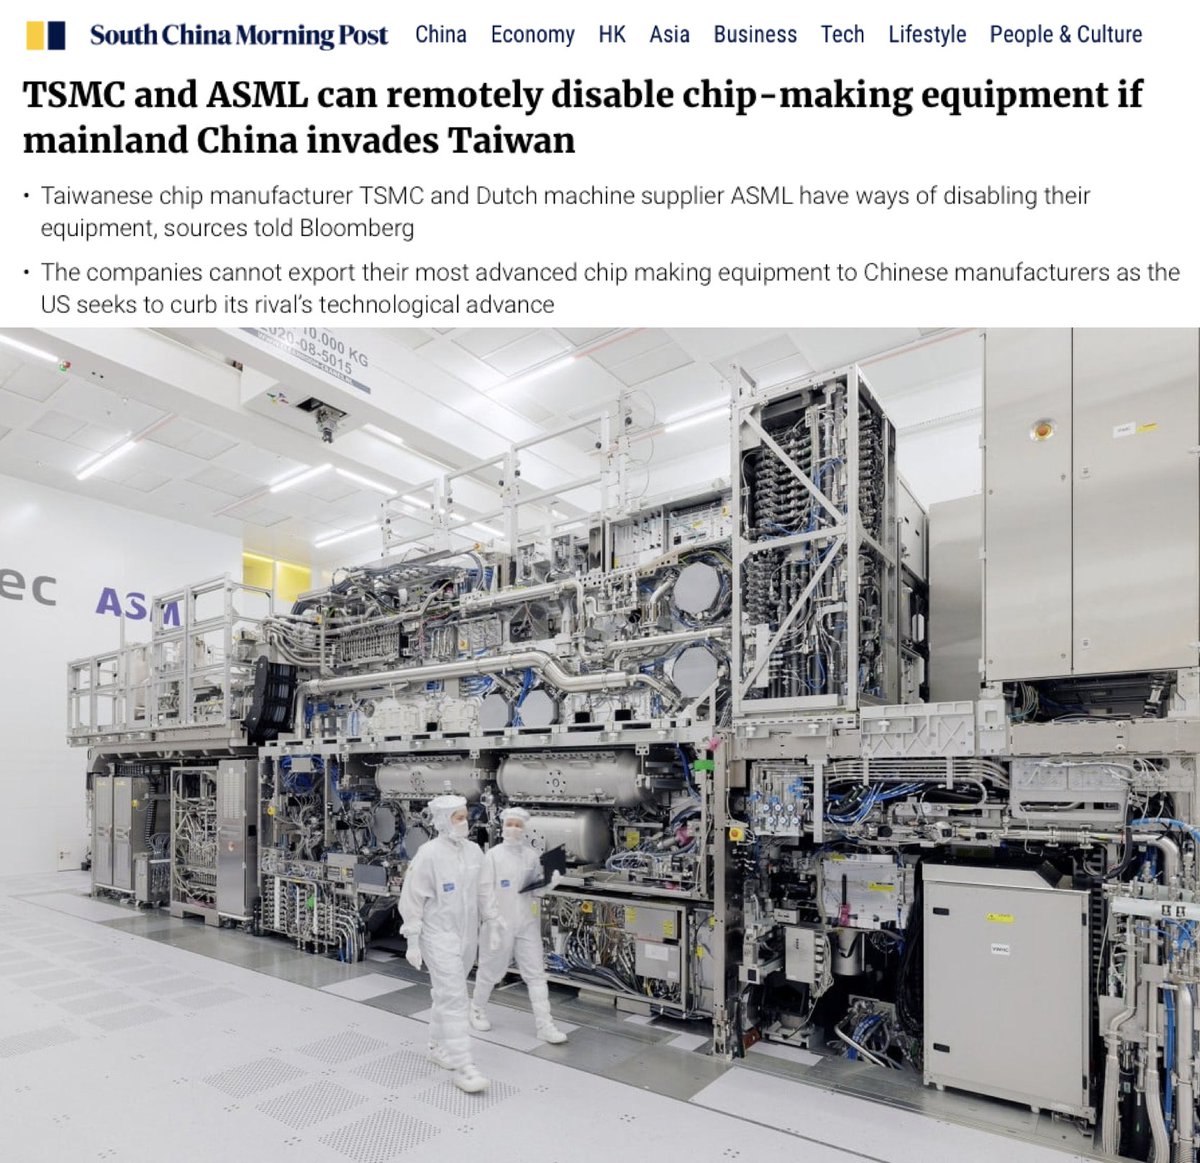 TSMC and ASML can remotely disable chip-making equipment if #China invades #Taiwan

Taiwanese chip manufacturer TSMC and Dutch machine supplier ASML have ways of disabling their equipment, sources told Bloomberg.

The companies cannot export their most advanced chip making